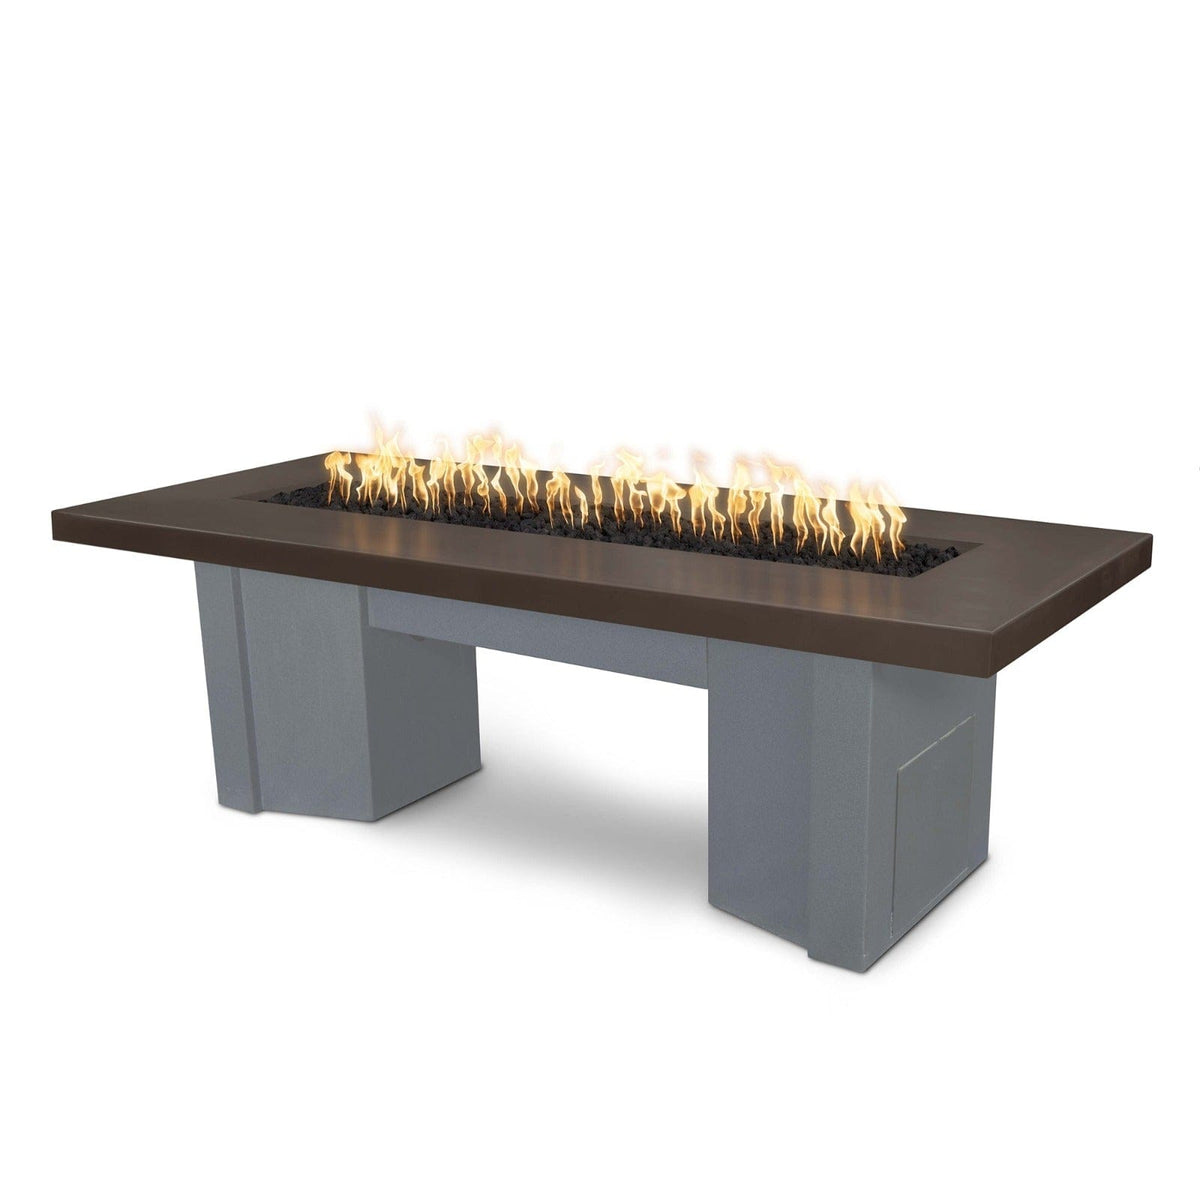 The Outdoor Plus Fire Features Chocolate (-CHC) / Gray Powder Coated Steel (-GRY) The Outdoor Plus 60&quot; Alameda Fire Table Smooth Concrete in Natural Gas - Flame Sense System with Push Button Spark Igniter / OPT-ALMGFRC60FSEN-NG